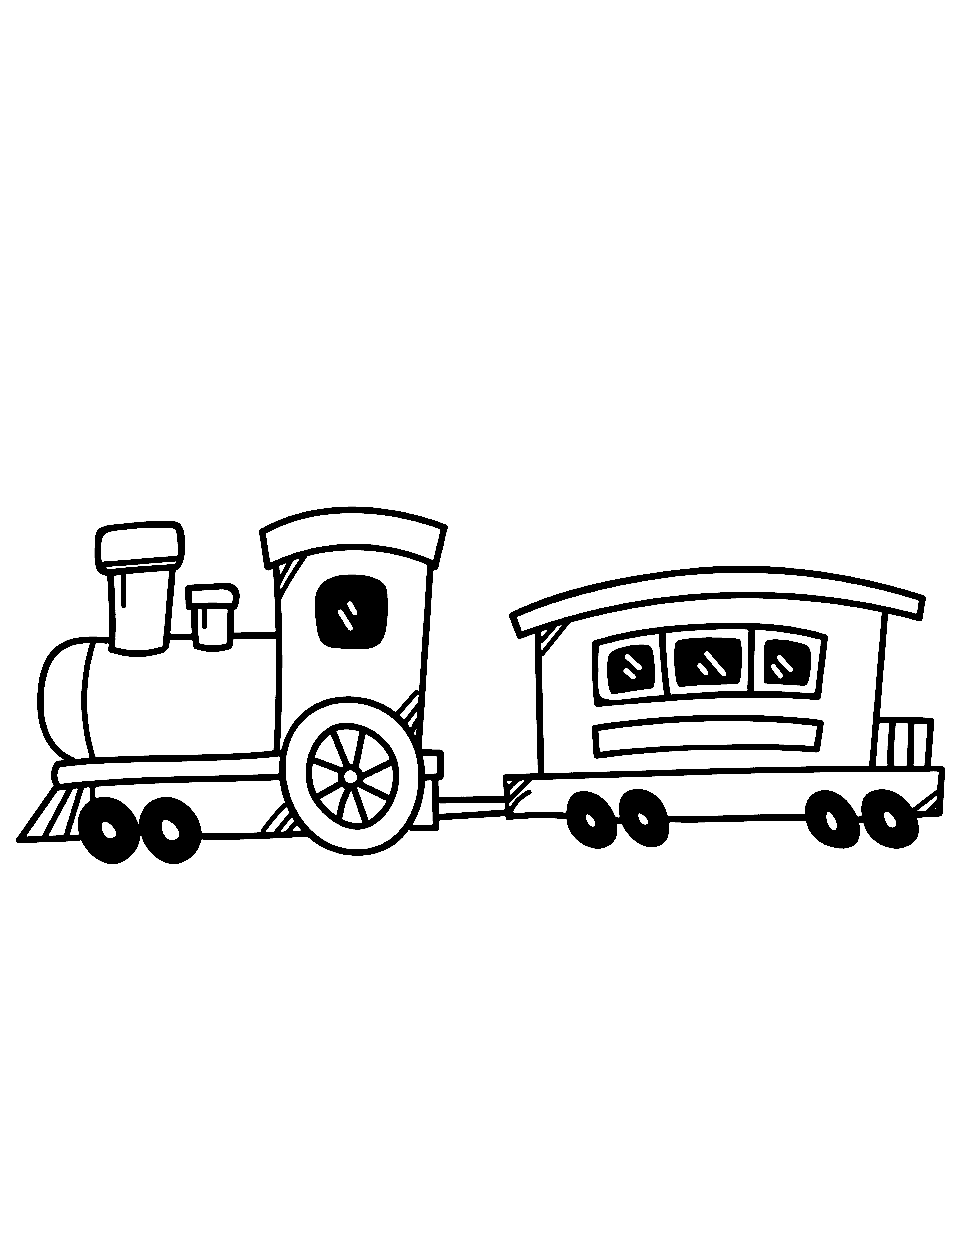 Kindergarten Train Adventure Coloring Page - A simple, cartoon-style train, ideal for young preschool children.